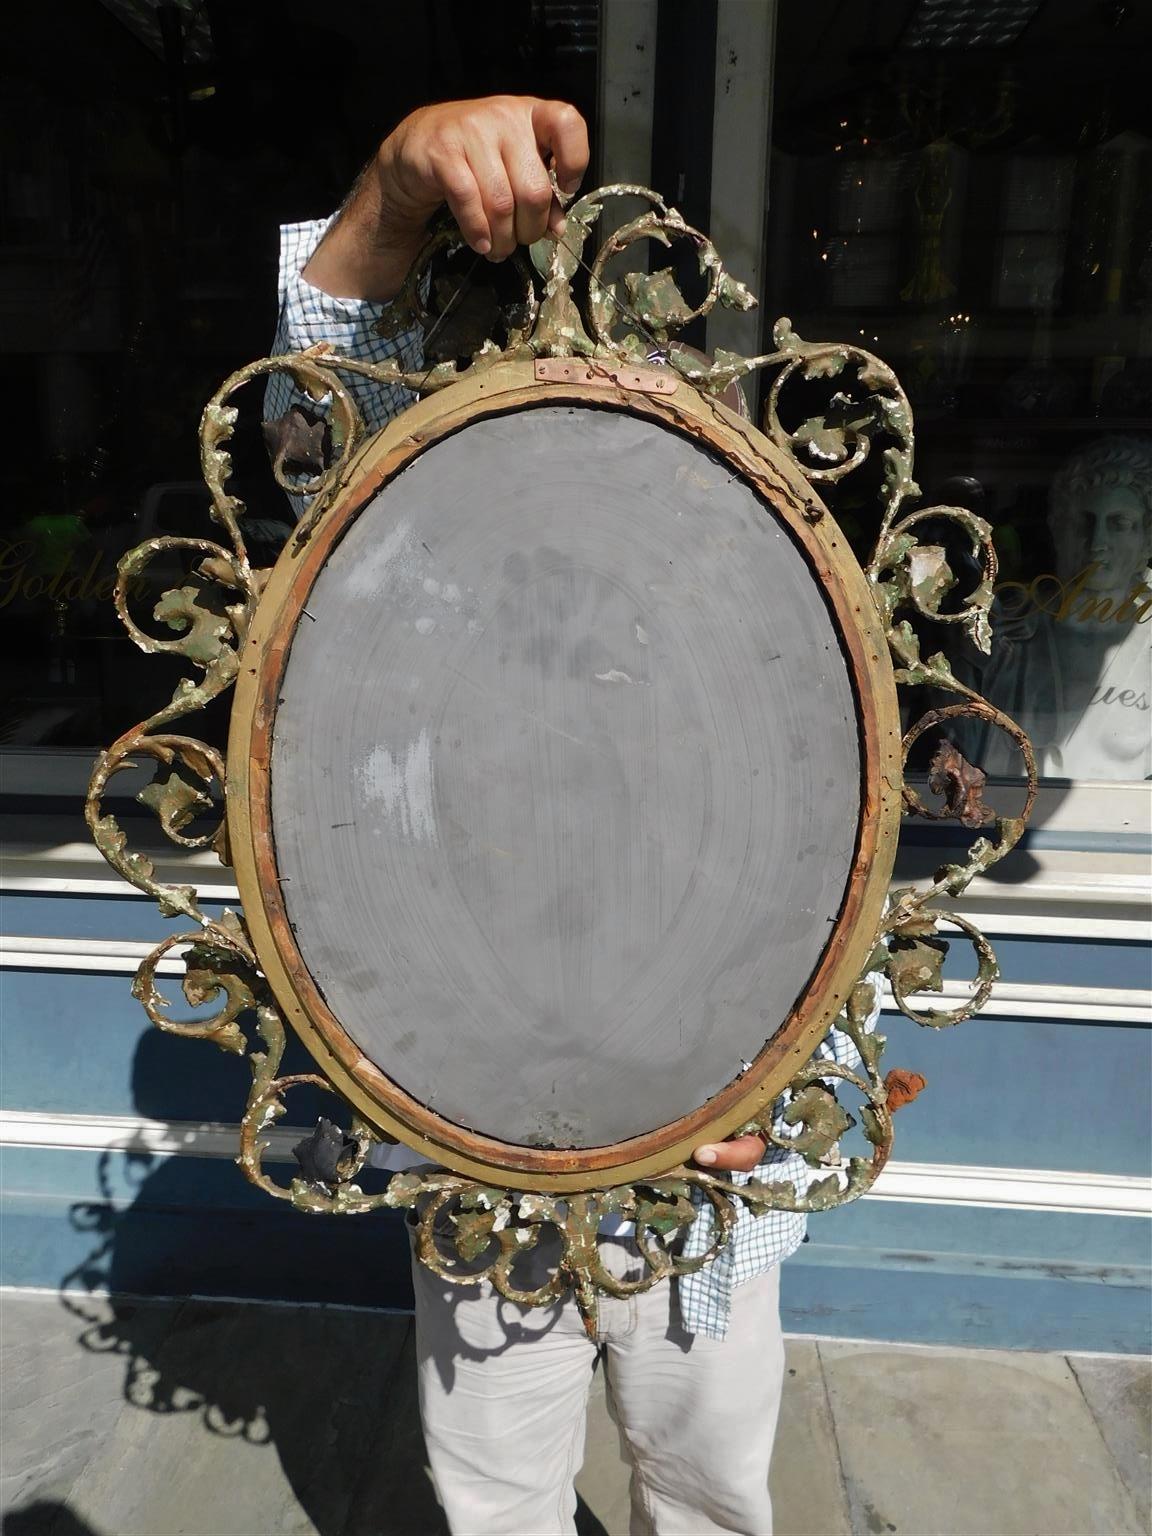 English Oval Gilt Carved Wood and Gesso Scrolled Foliage Wall Mirror, C. 1800 For Sale 5